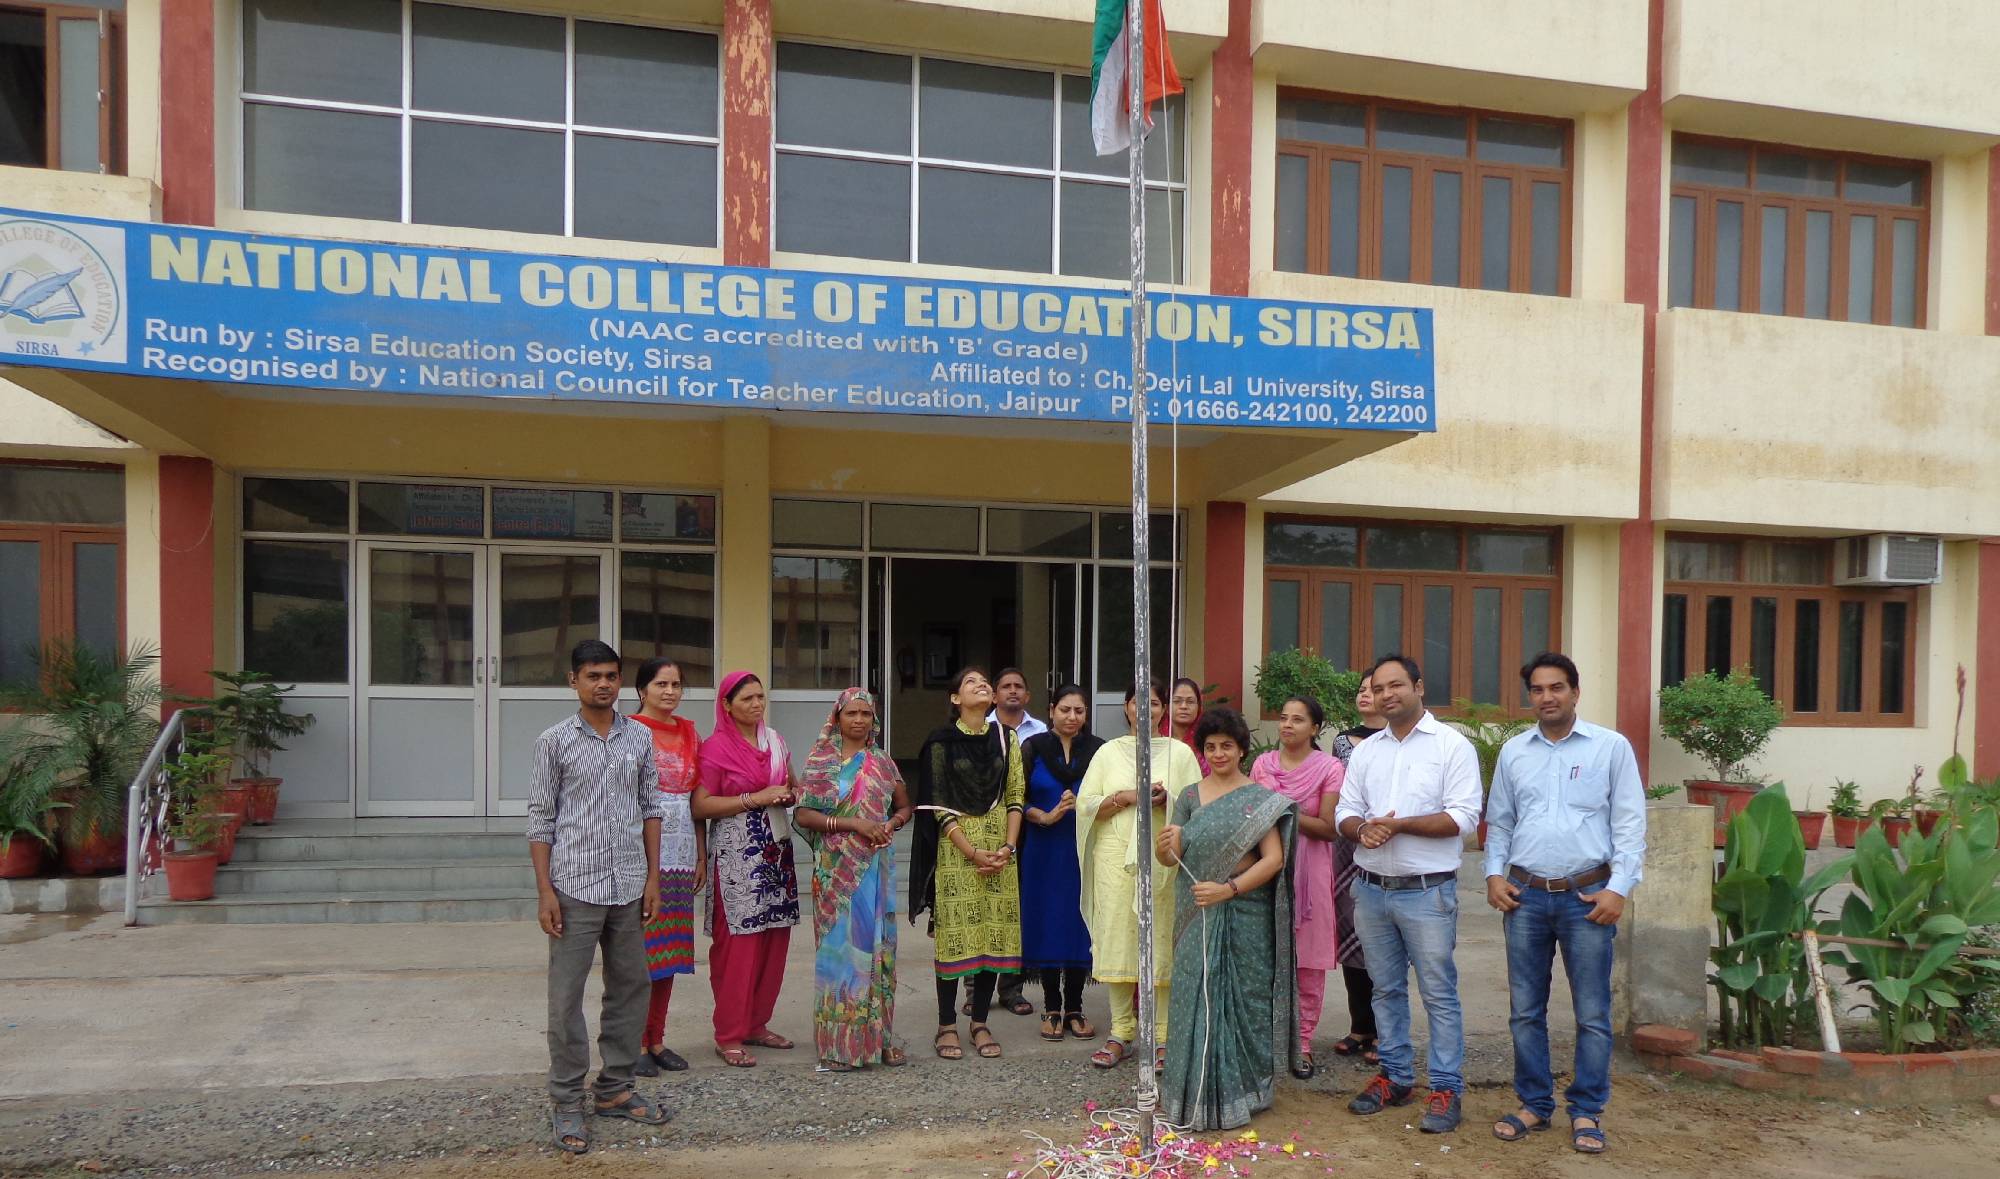 National College of Education, Sirsa Image